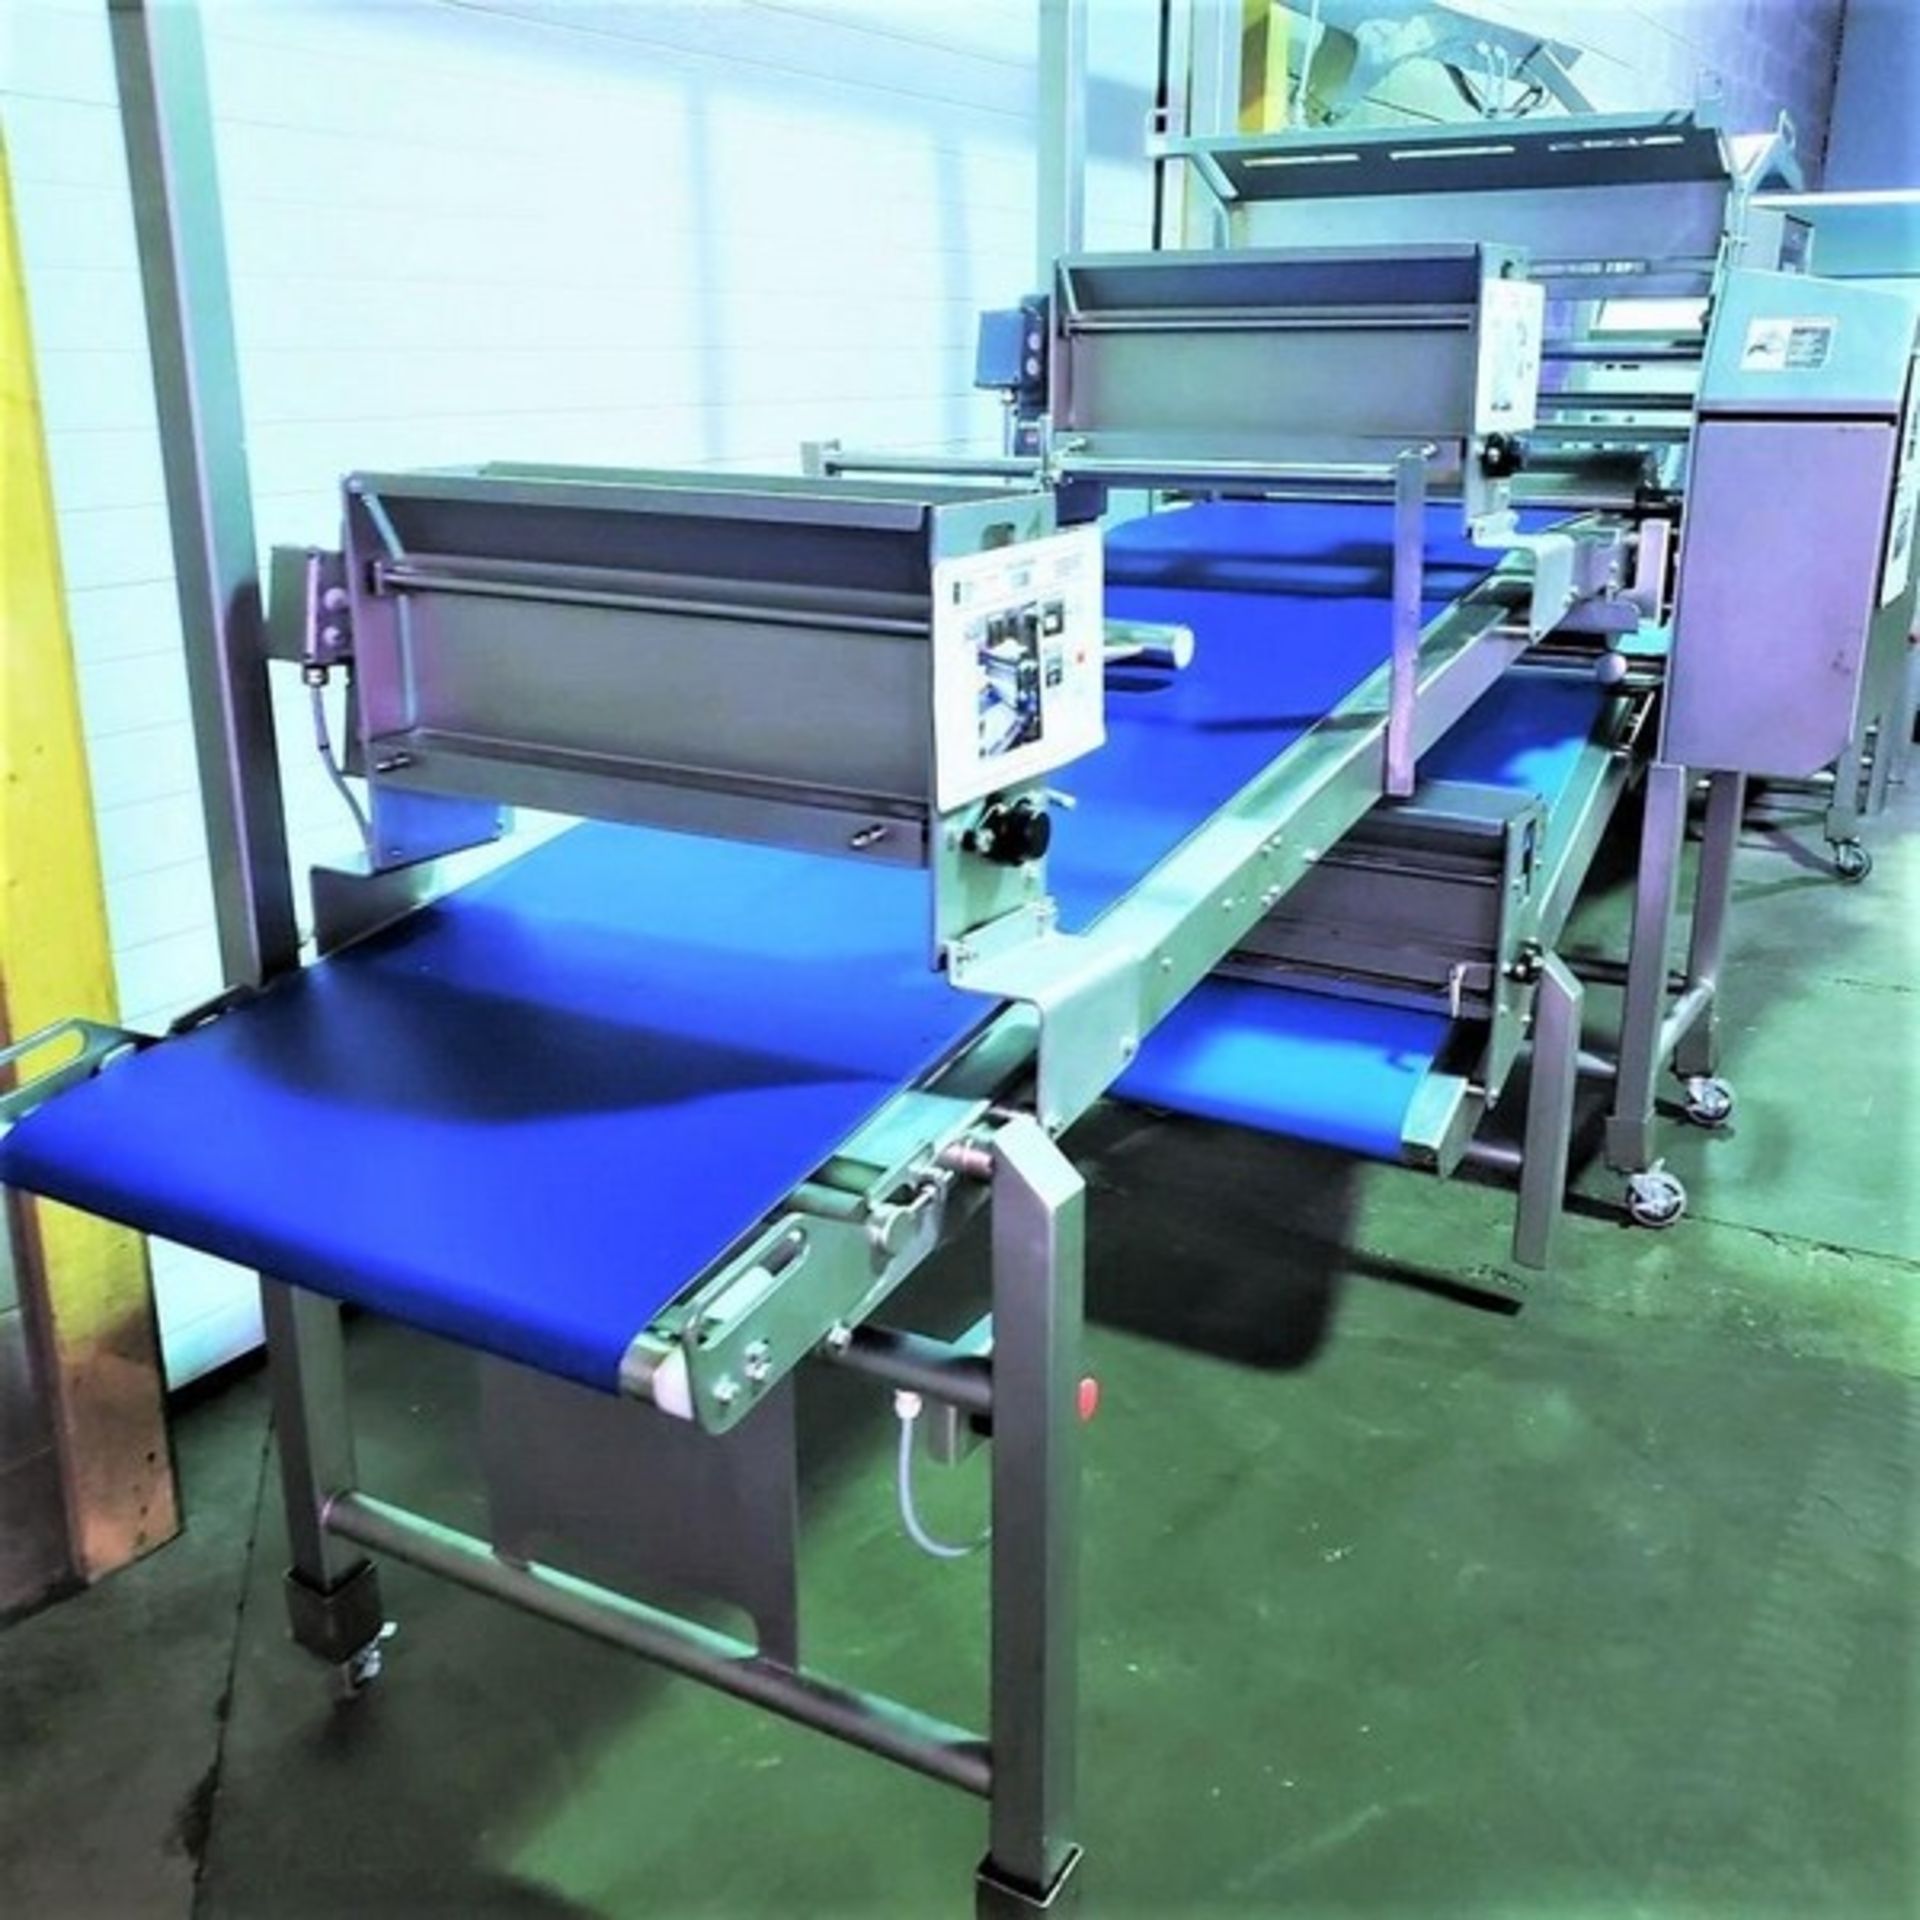 Tromp Bakery Line multi-purpose S/S Combines Dough and Flour Depositin, With Roller Sheeting, Fold - Image 5 of 11